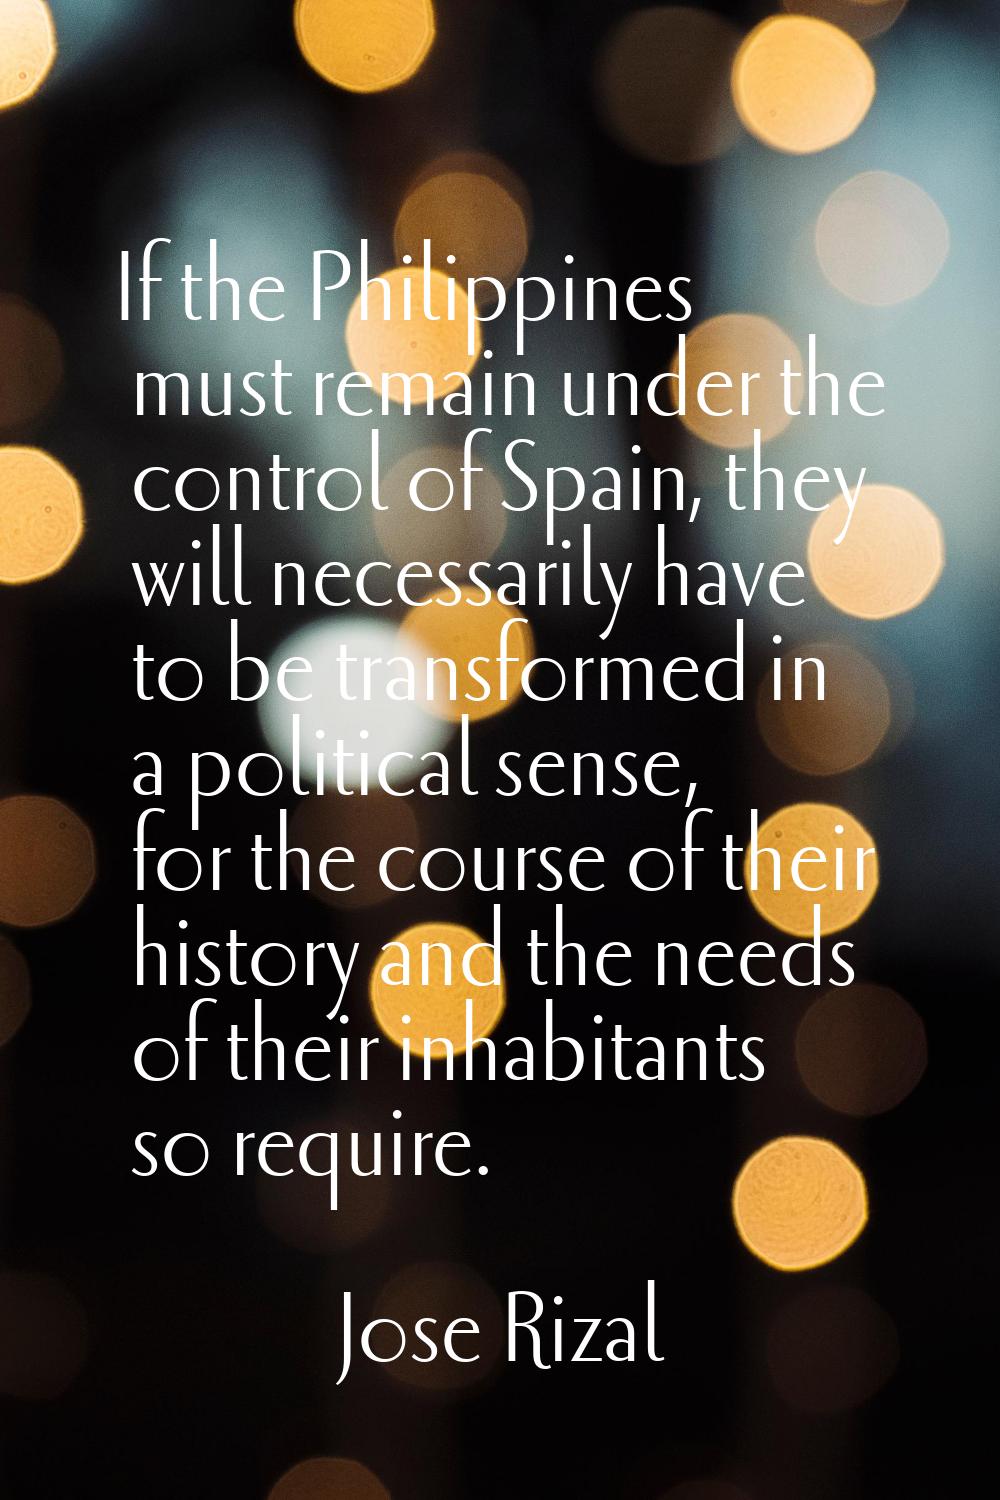 If the Philippines must remain under the control of Spain, they will necessarily have to be transfo